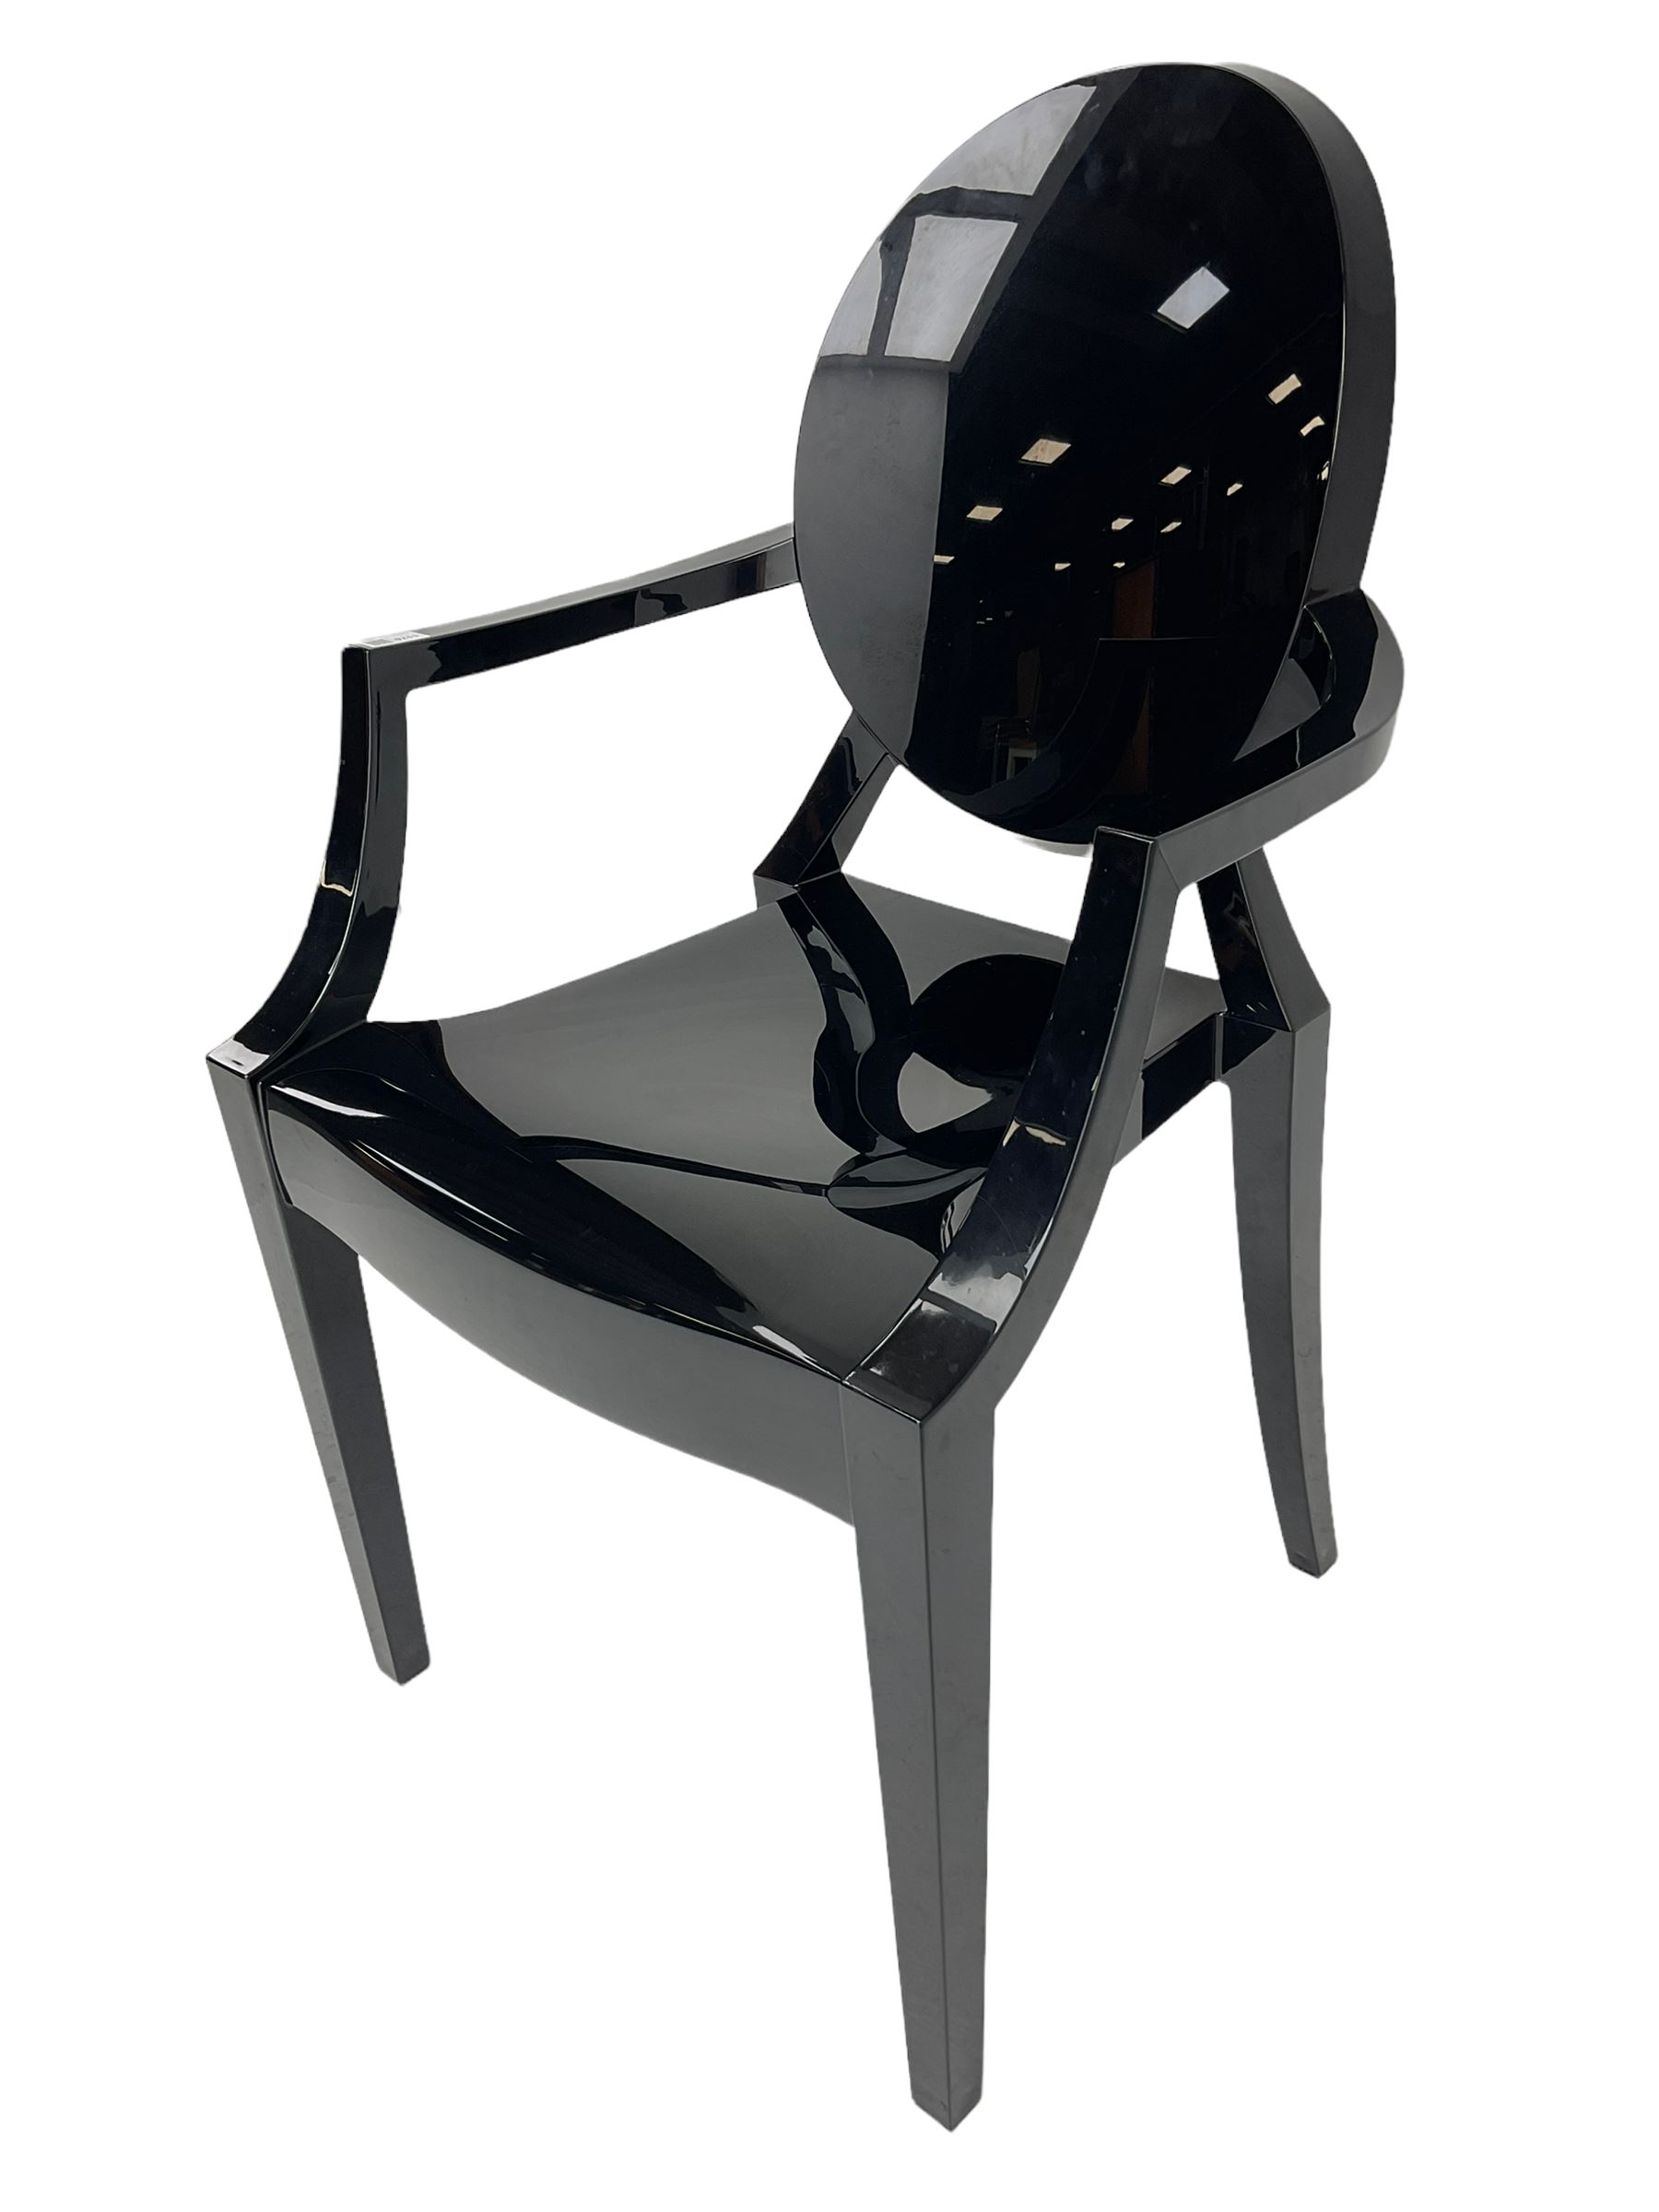 Philippe Starck for Kartell - 'Louis Ghost' chair - Image 5 of 6